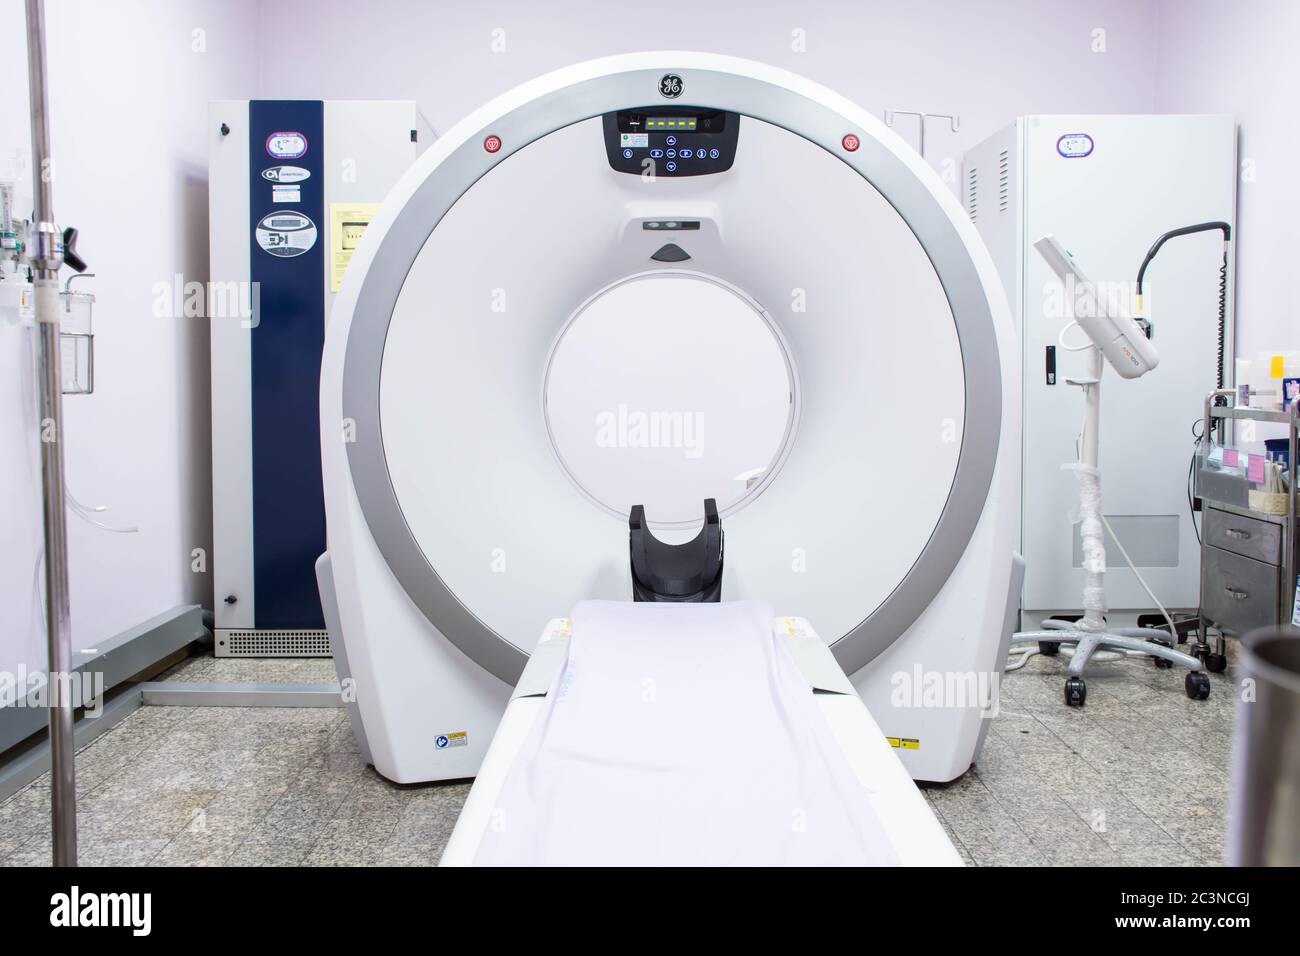 Ct Scan Machine In Radiology Room On White Background Stock Photo Alamy